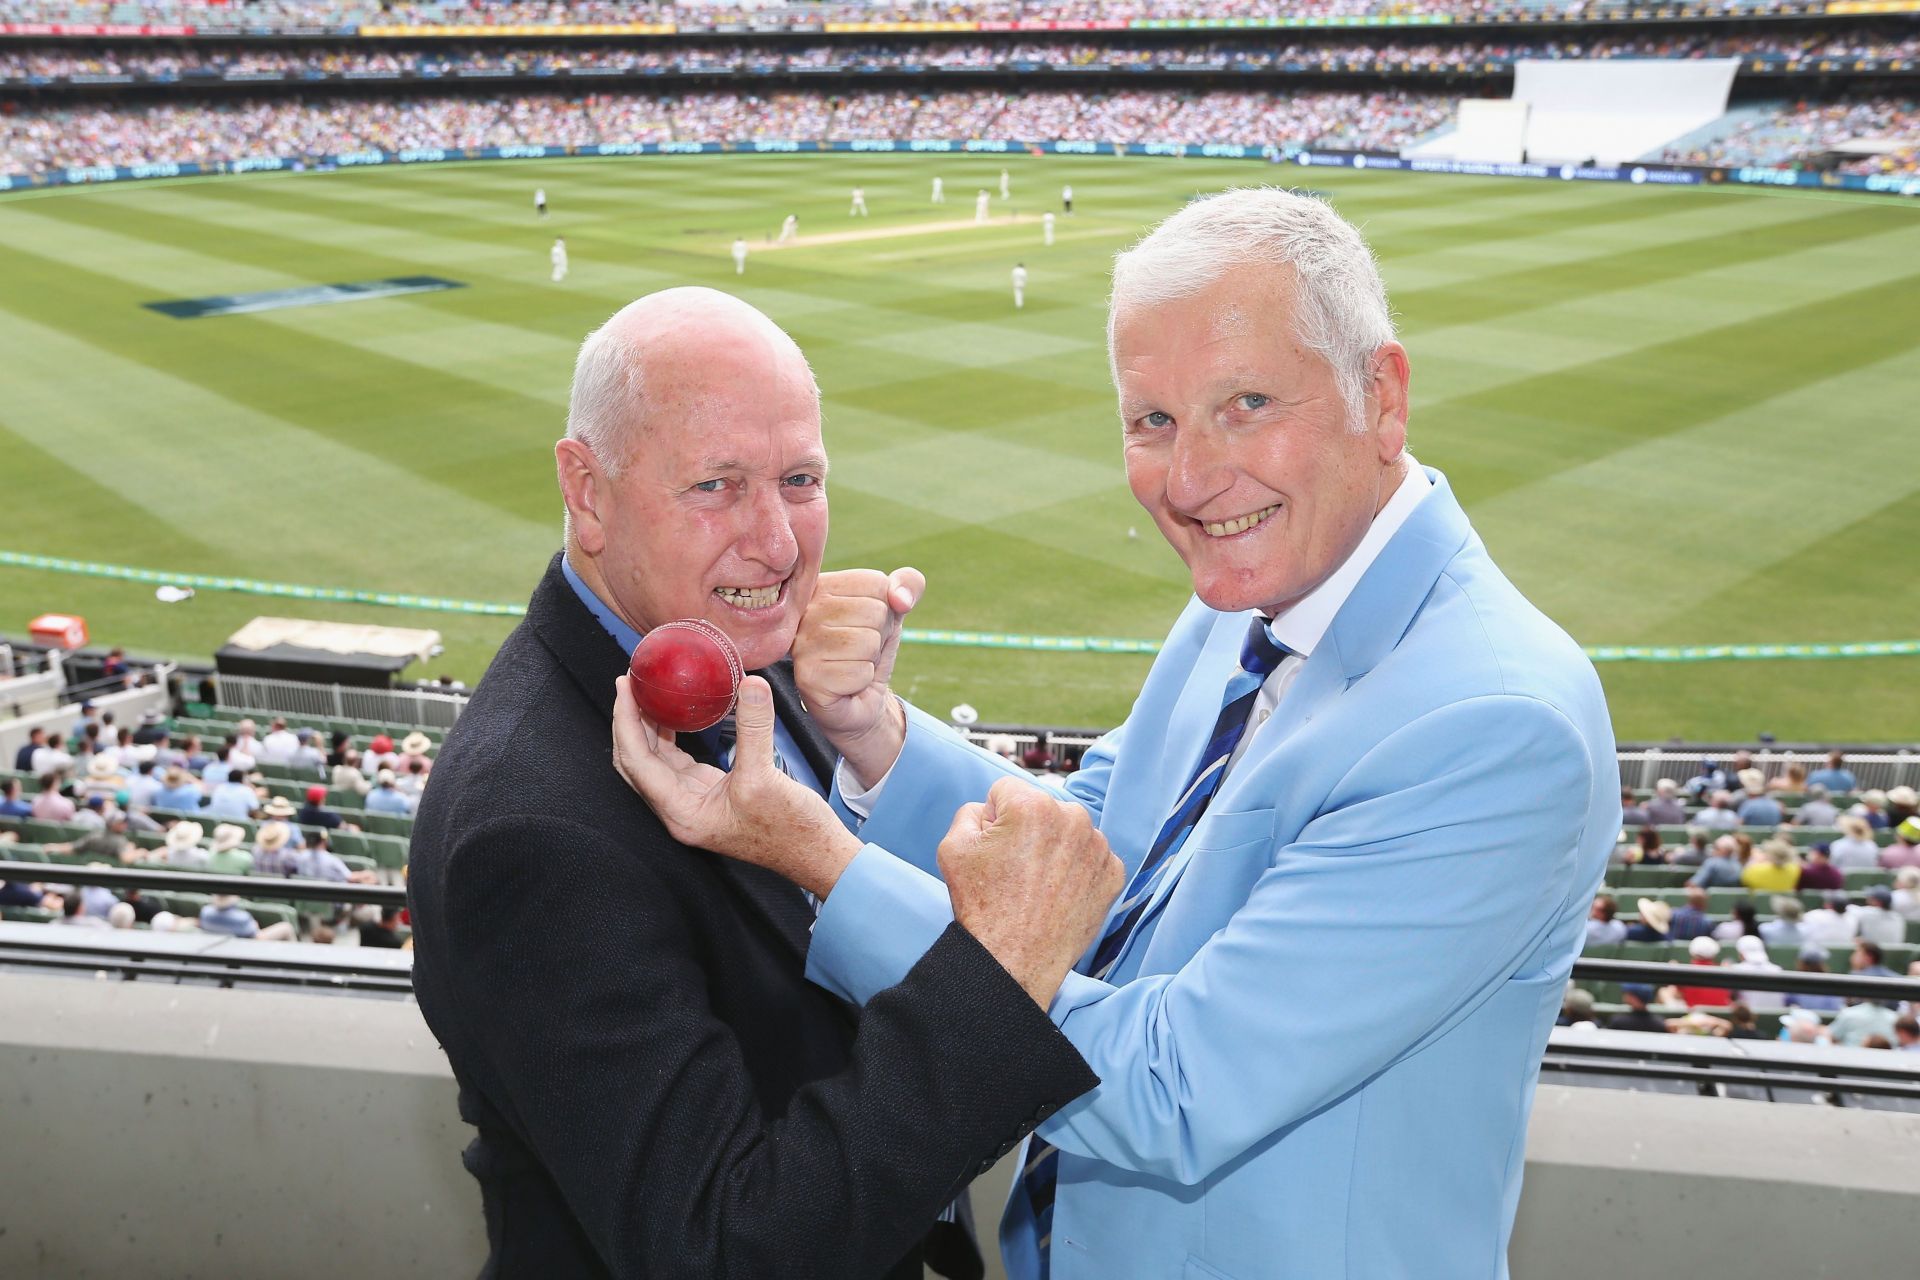 Former cricketers Rick McCosker (L) of Australia and Bob Willis of England